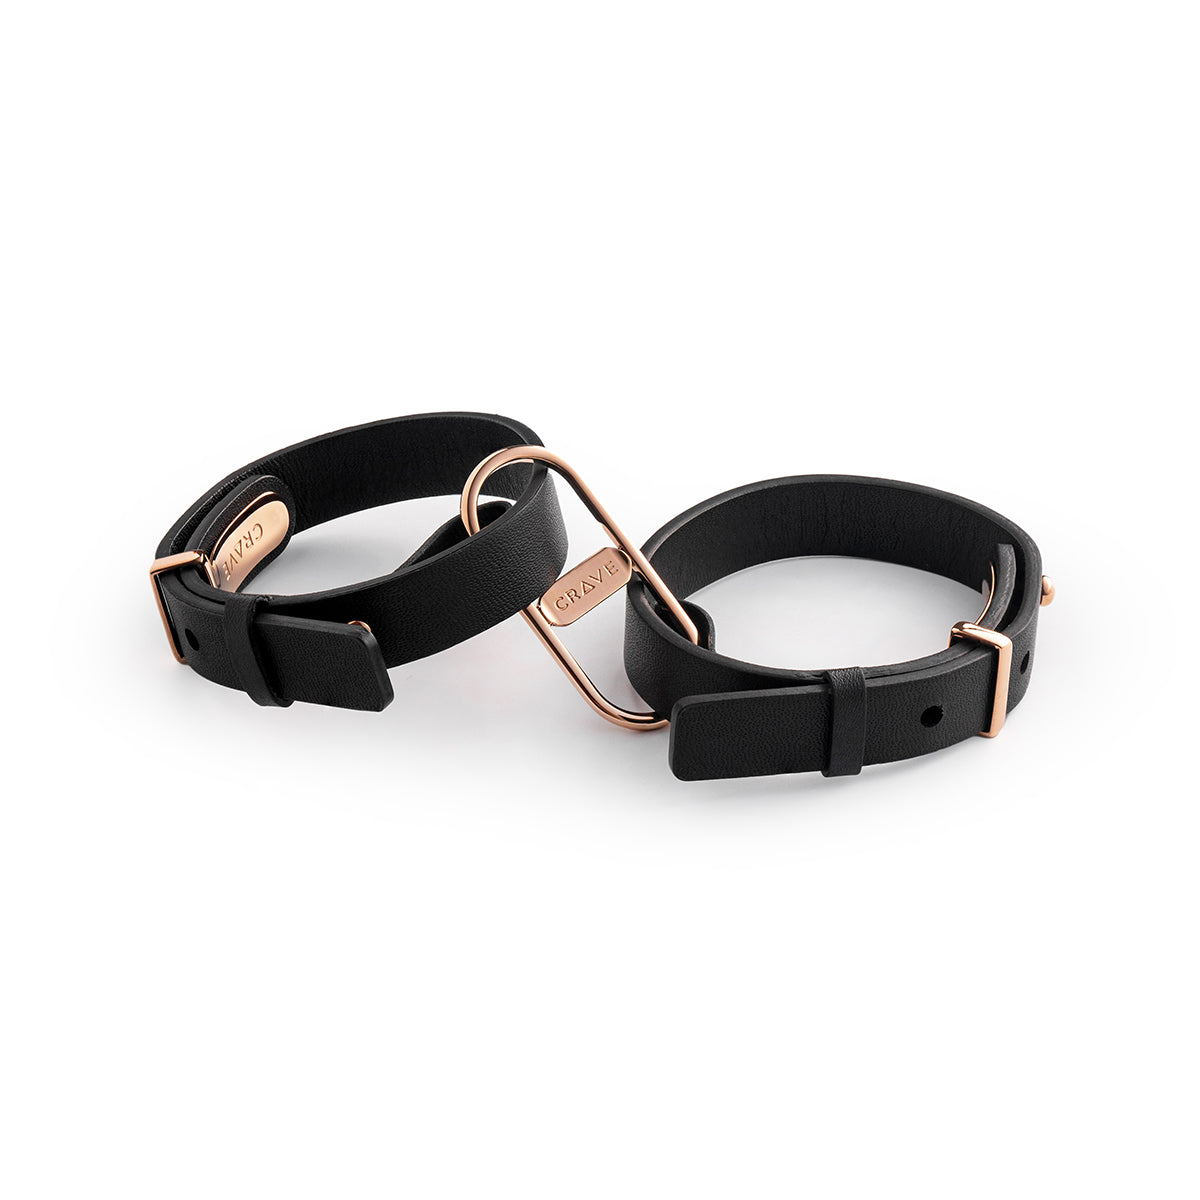 Crave ICON Cuffs- Black/Rose Gold